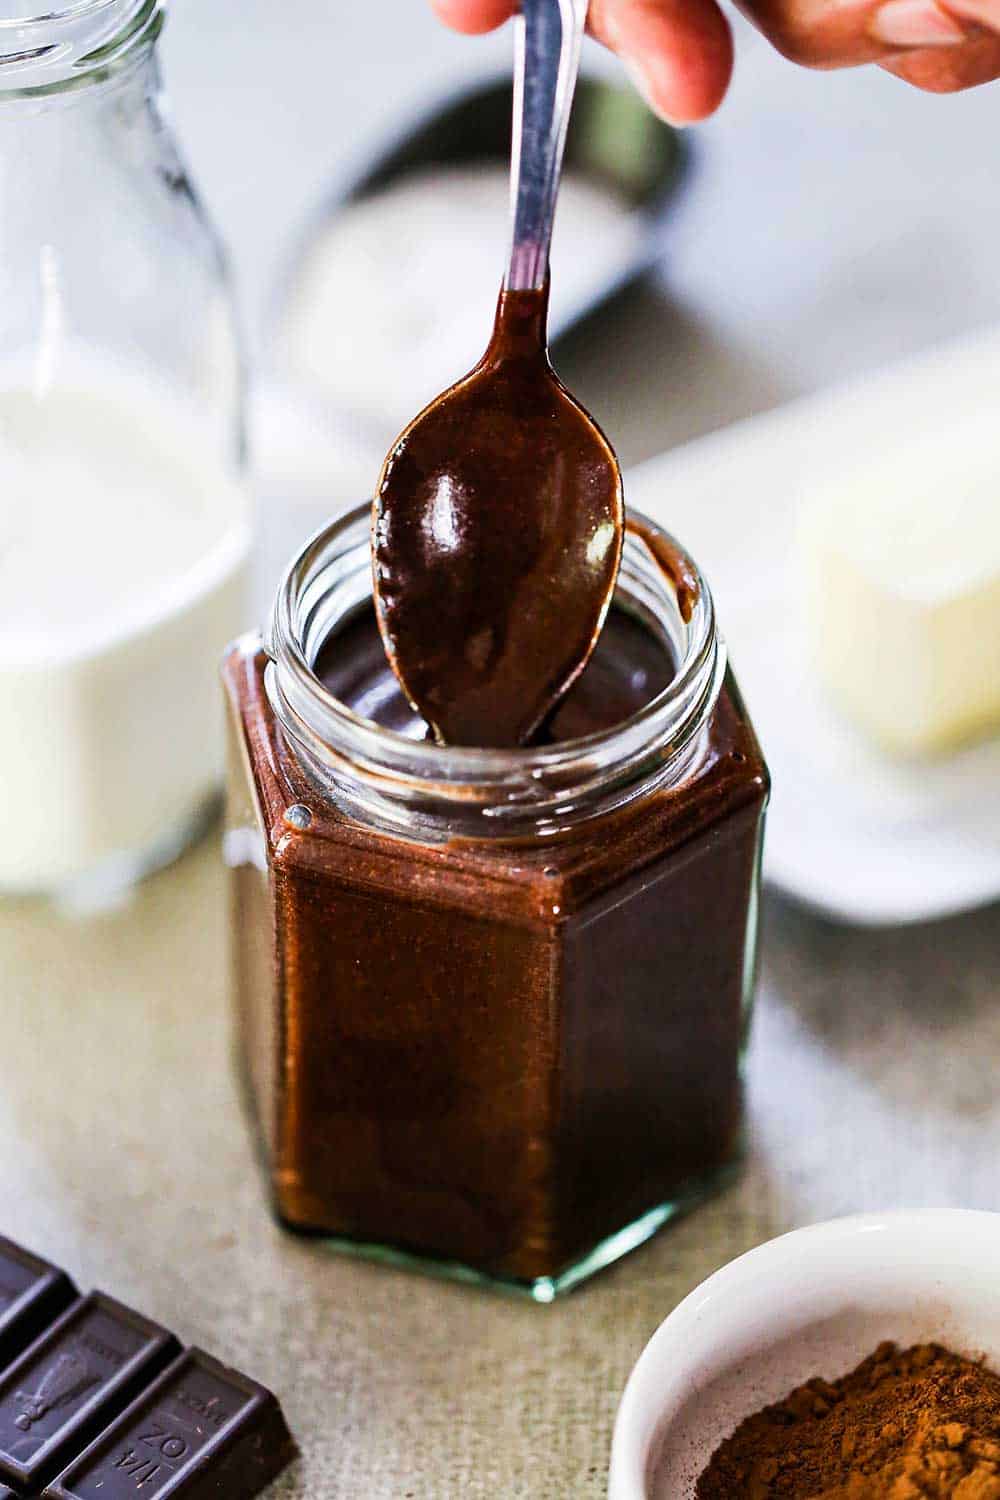 A person pulling a spoon out of a small jar filled with homemade chocolate sauce.